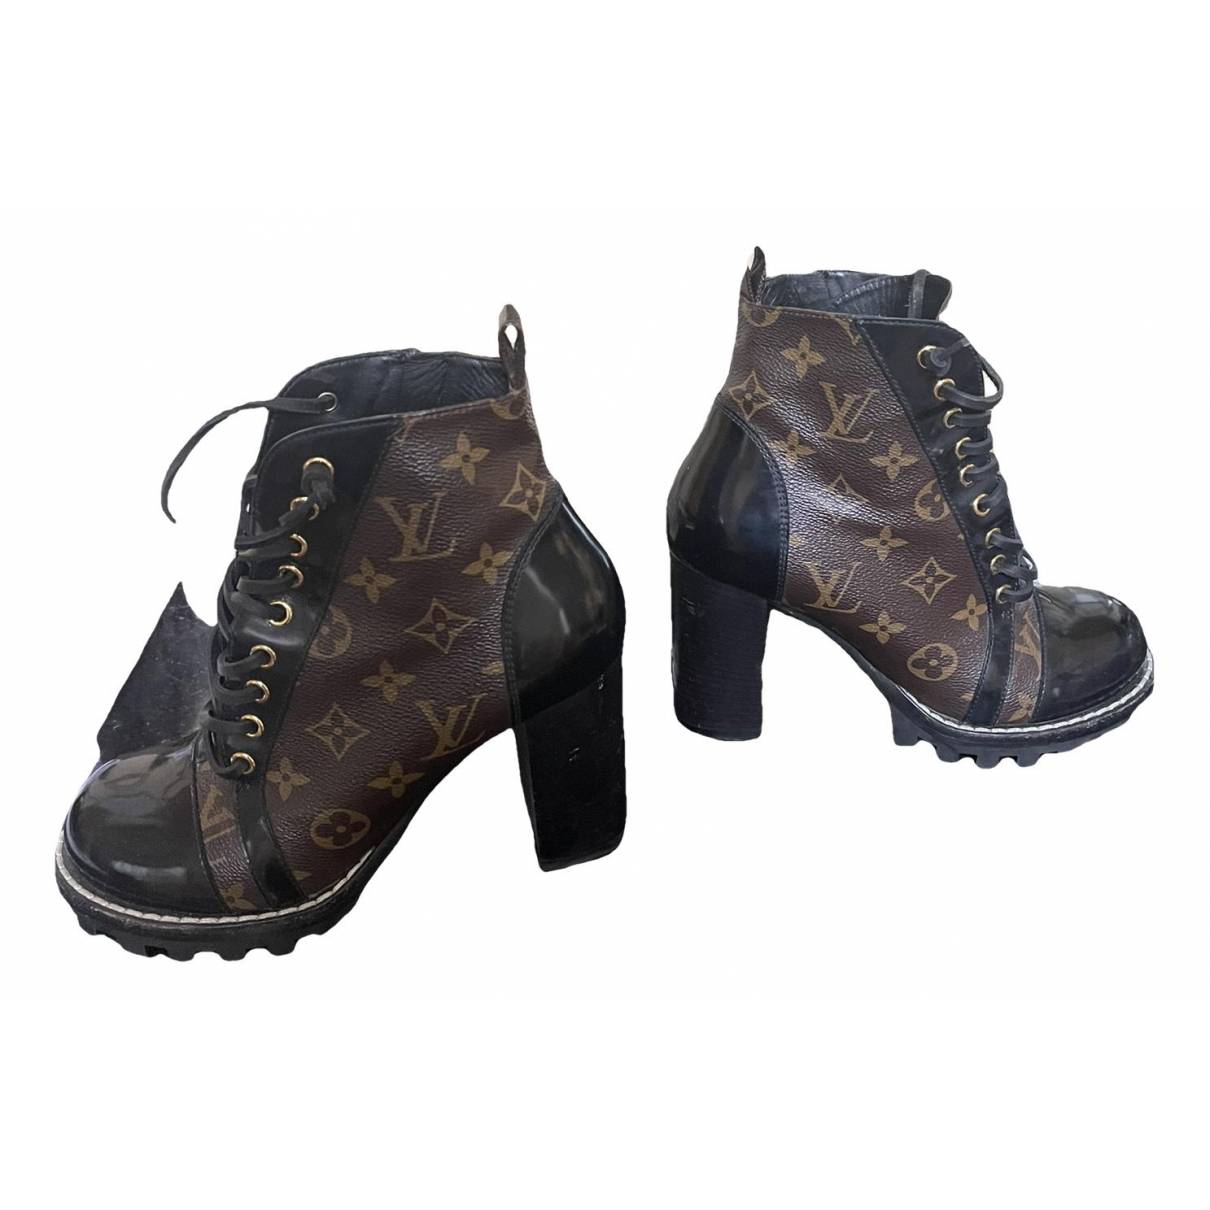 Star trail leather lace up boots Louis Vuitton Brown size 38 EU in Leather  - 37560692